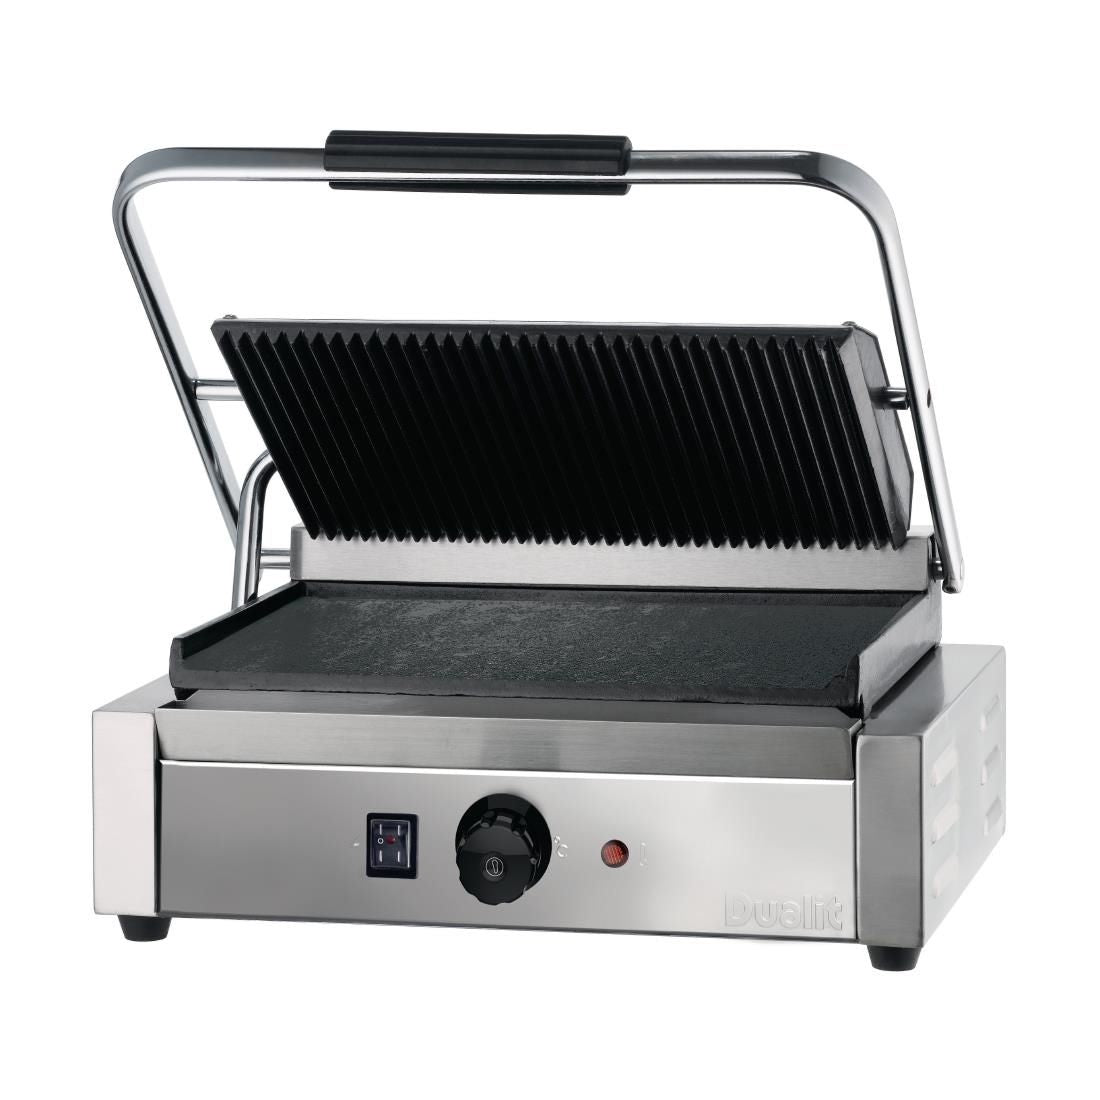 Dualit Caterers Contact Grill 96001 JD Catering Equipment Solutions Ltd